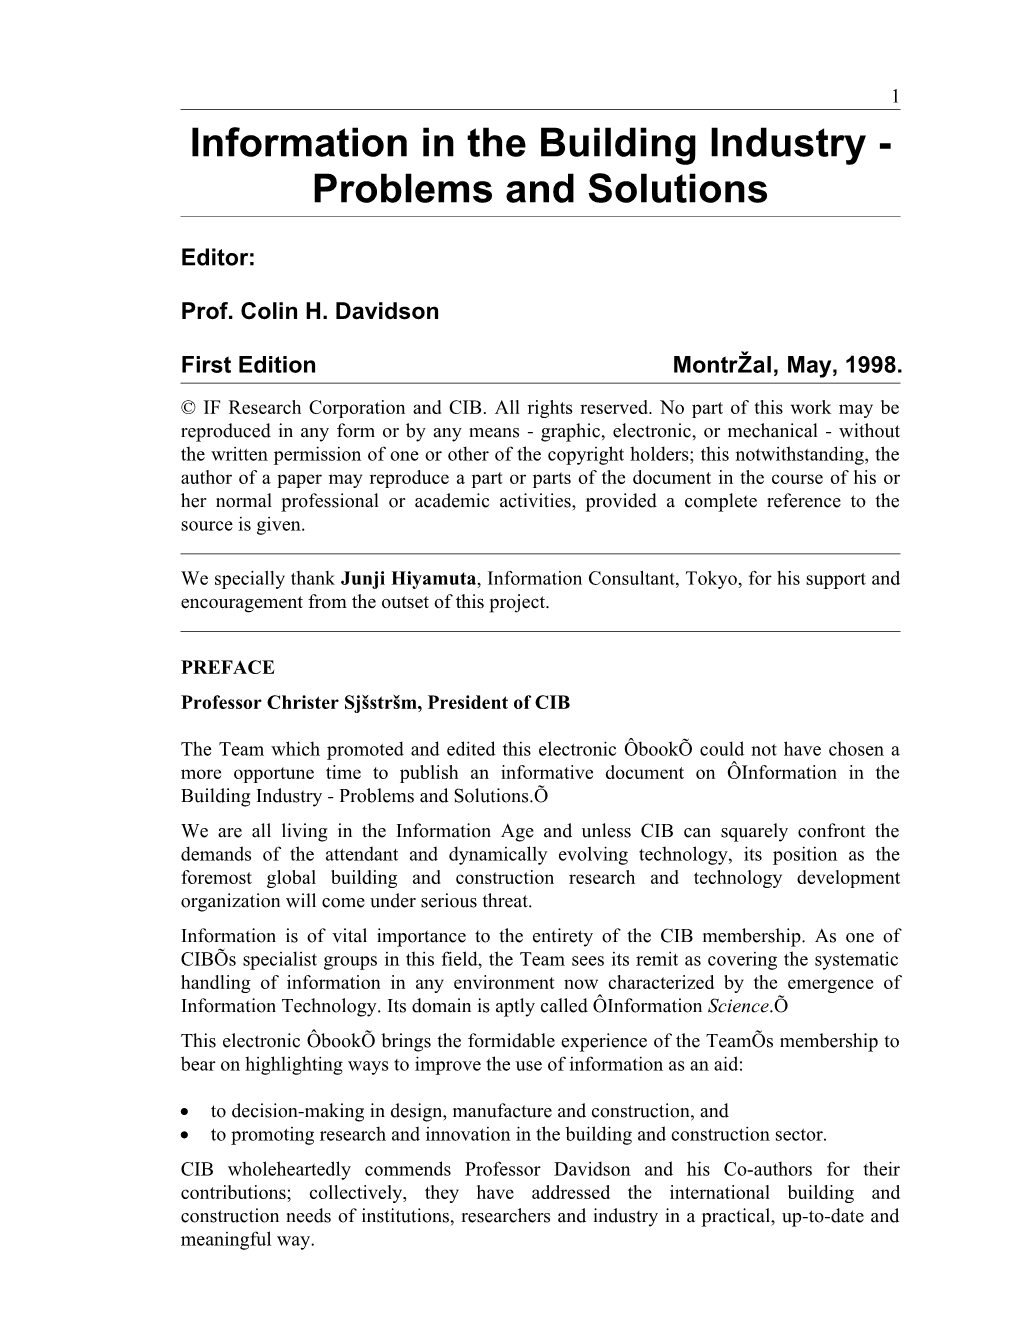 Information in the Building Industry - Problems and Solutions